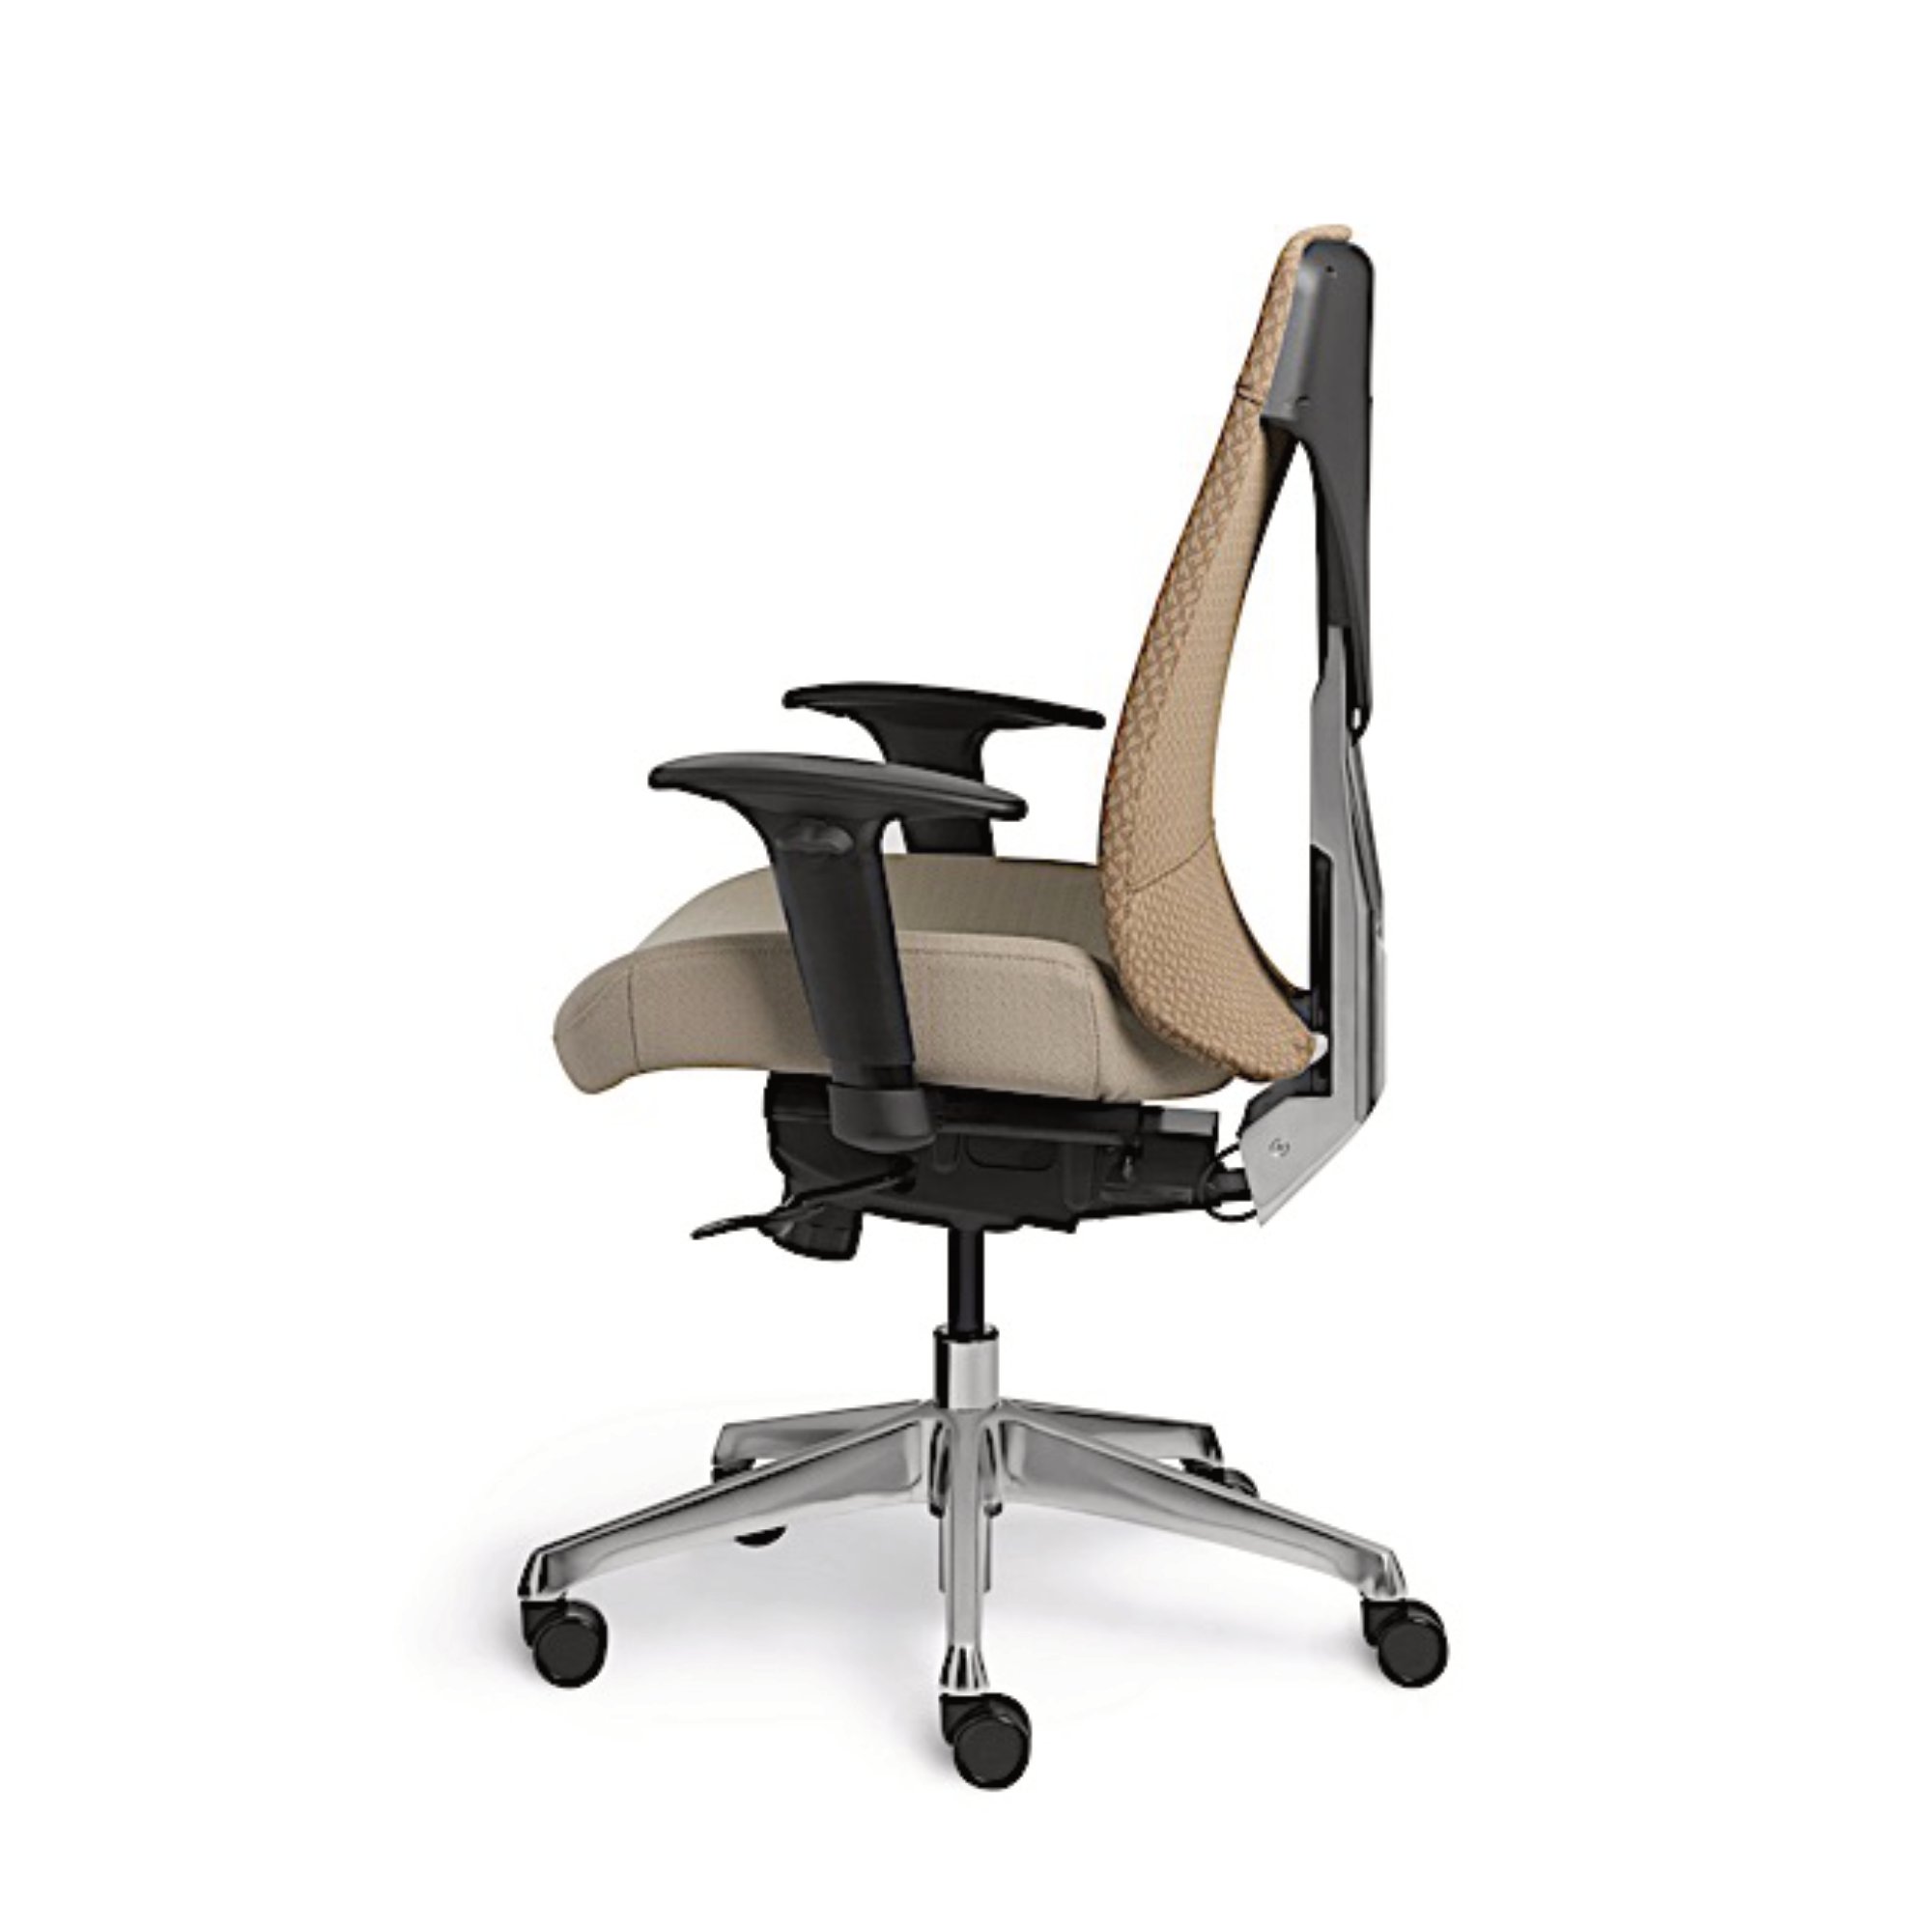 EDC-618 Management Synchro Ergonomic Gaming Chair by OM Seating